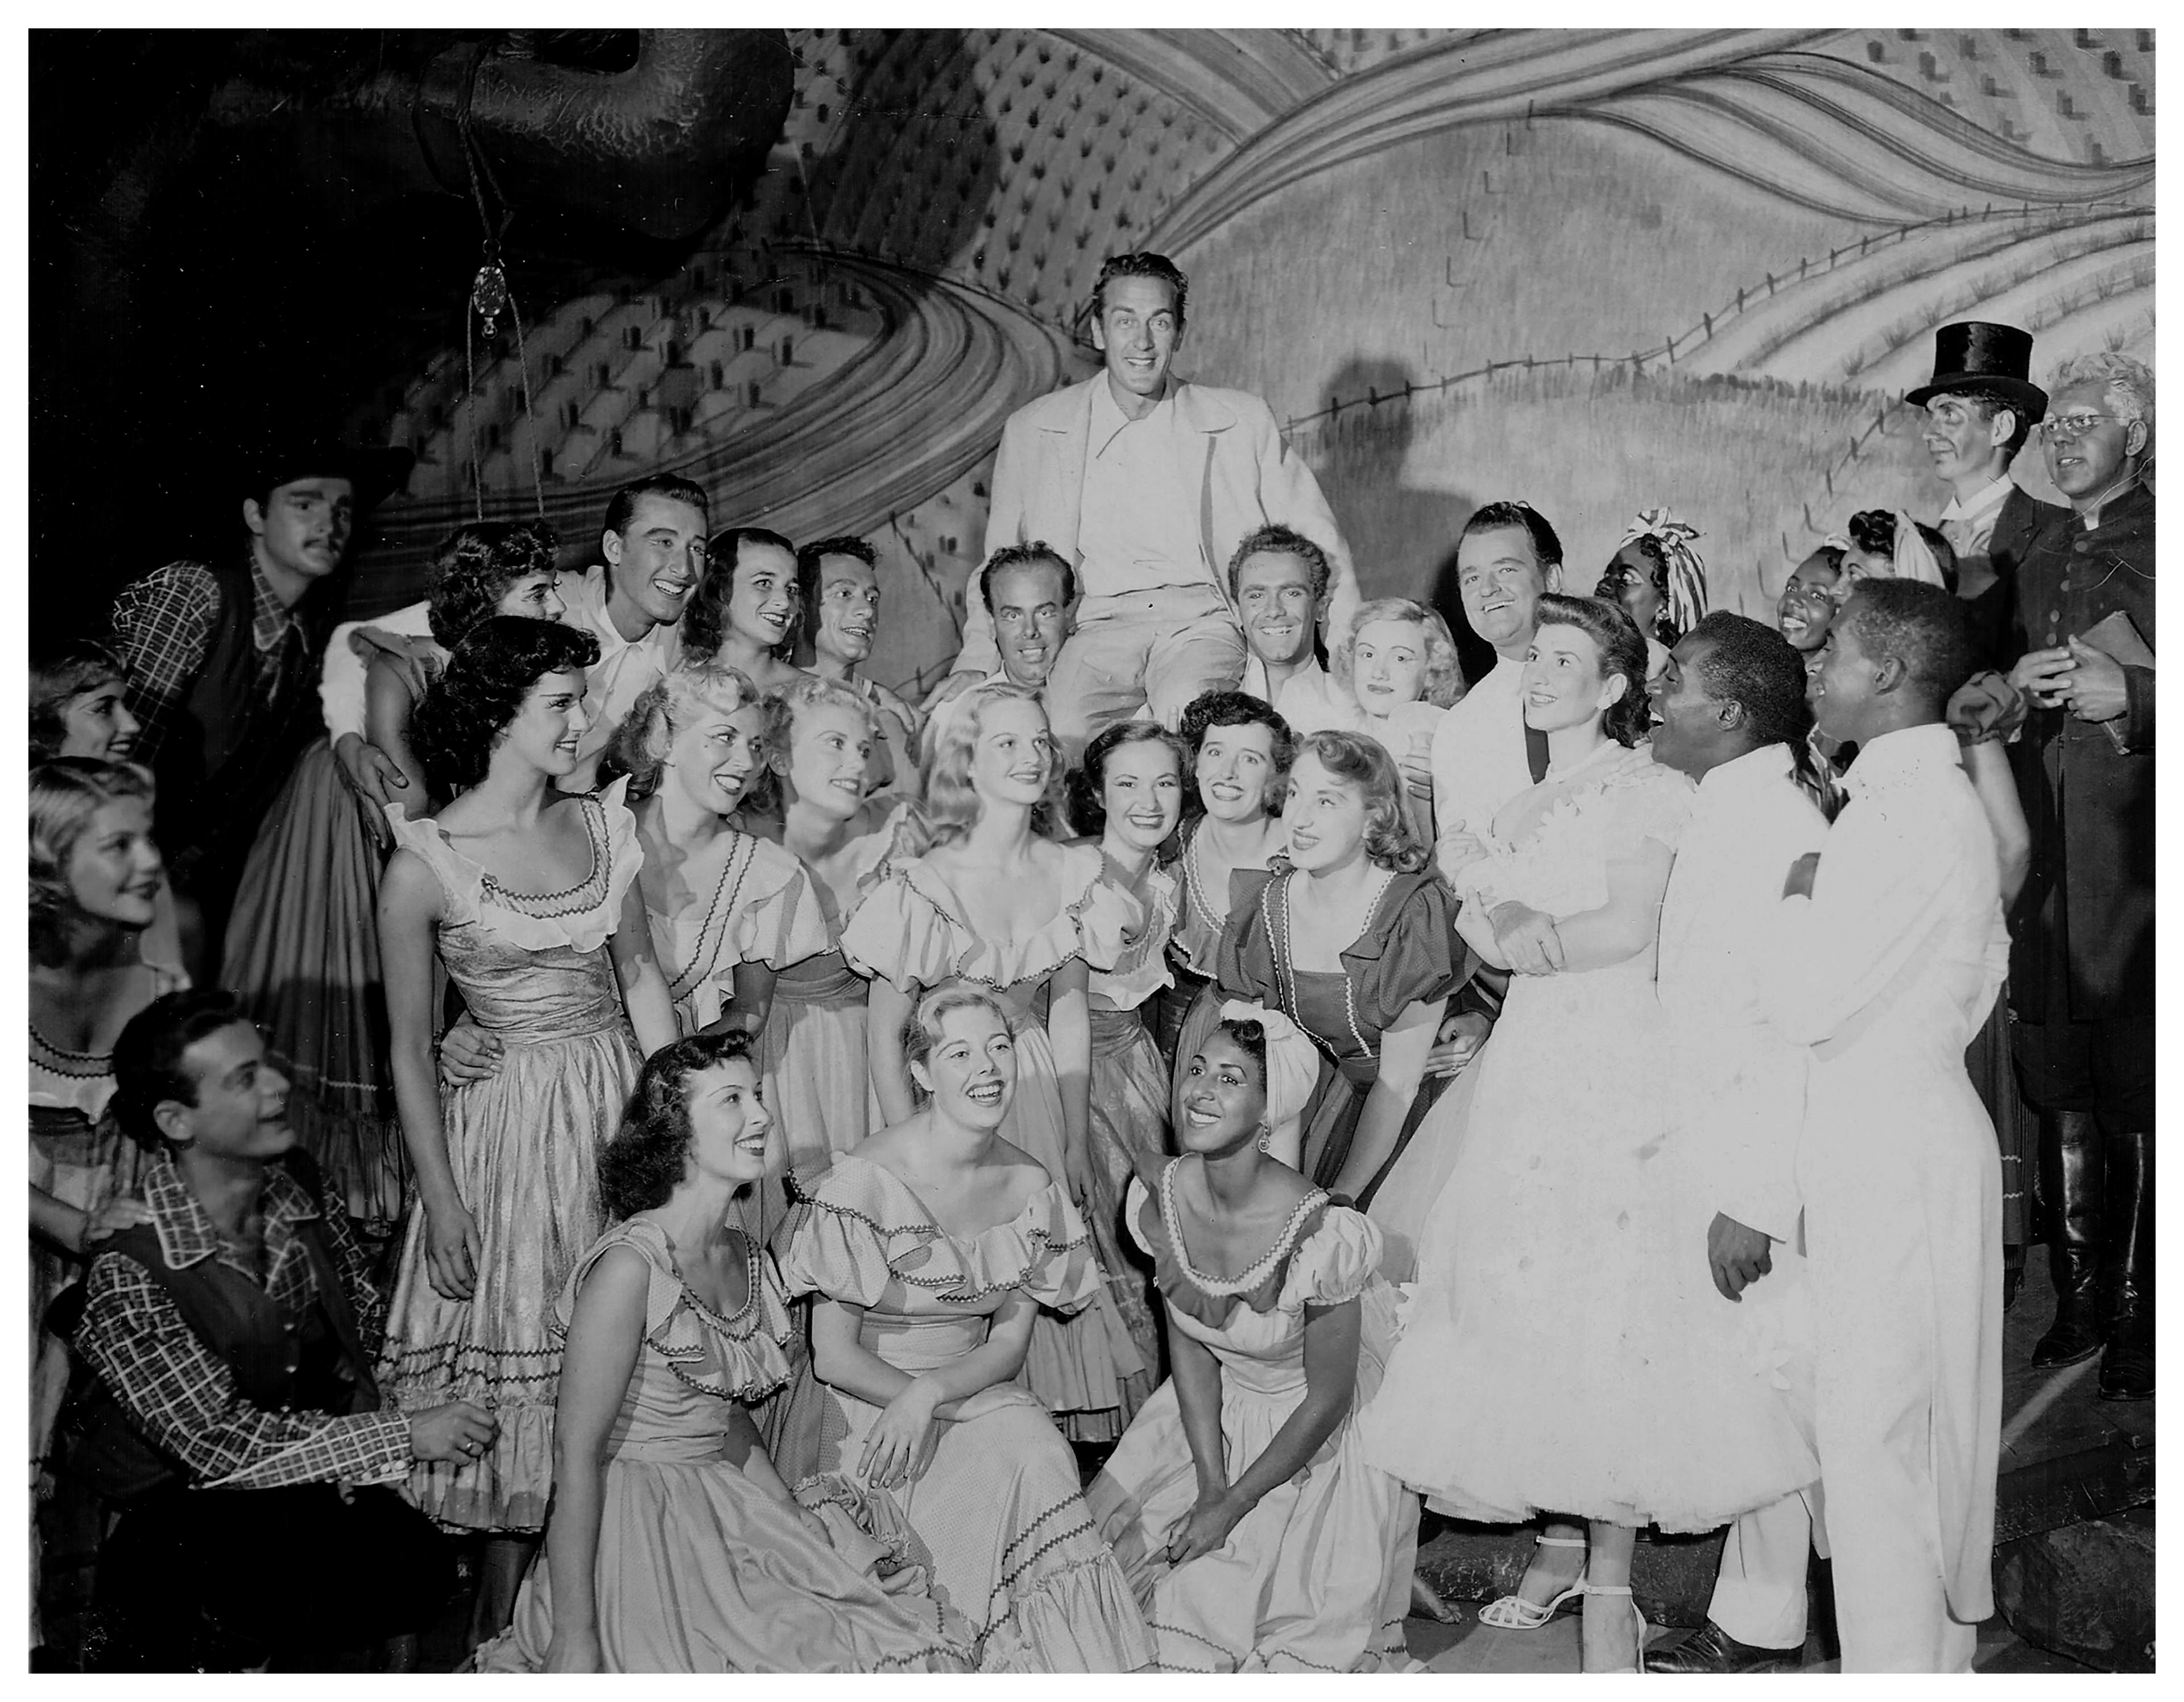 A black and white cast photo from a theatre play with a large group of smiling people standing and crouching in rows. The people appear to be in costume and positioned in front of the stage backdrop. 